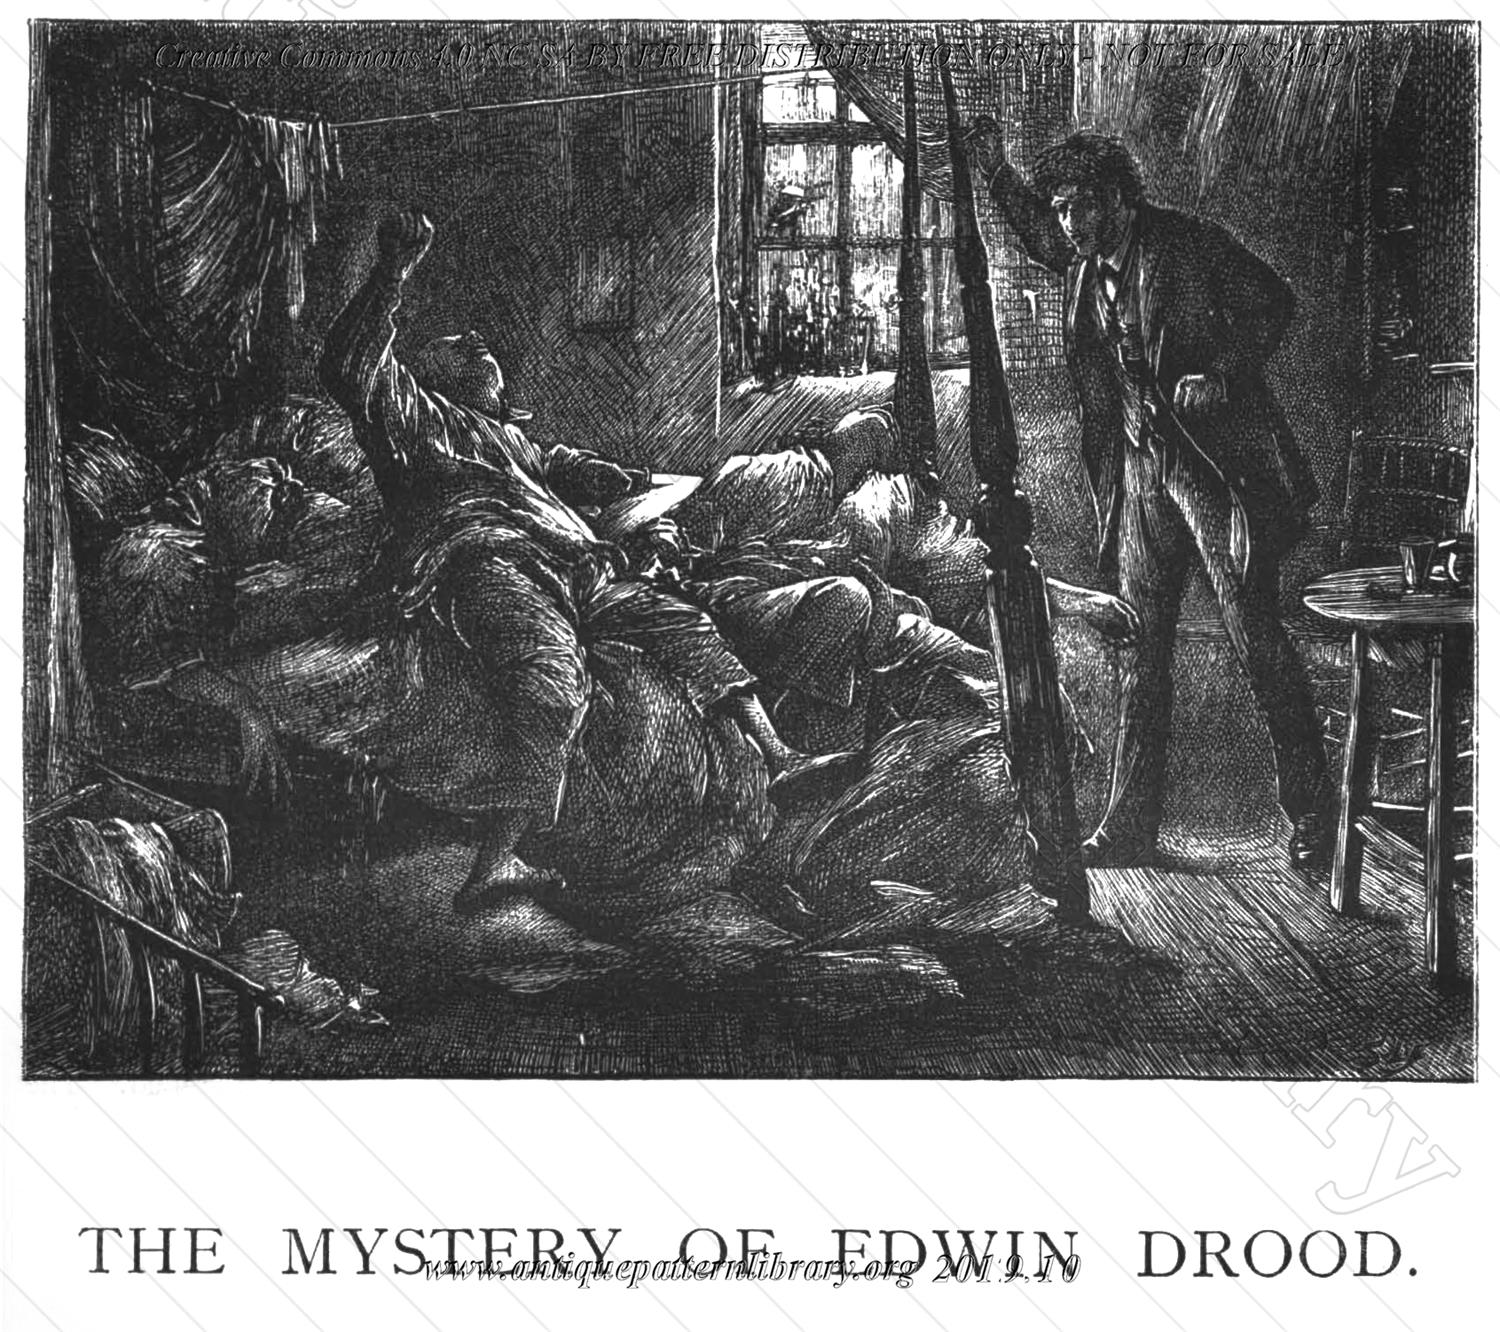 I-FW004 The Mystery of Edwin Drood